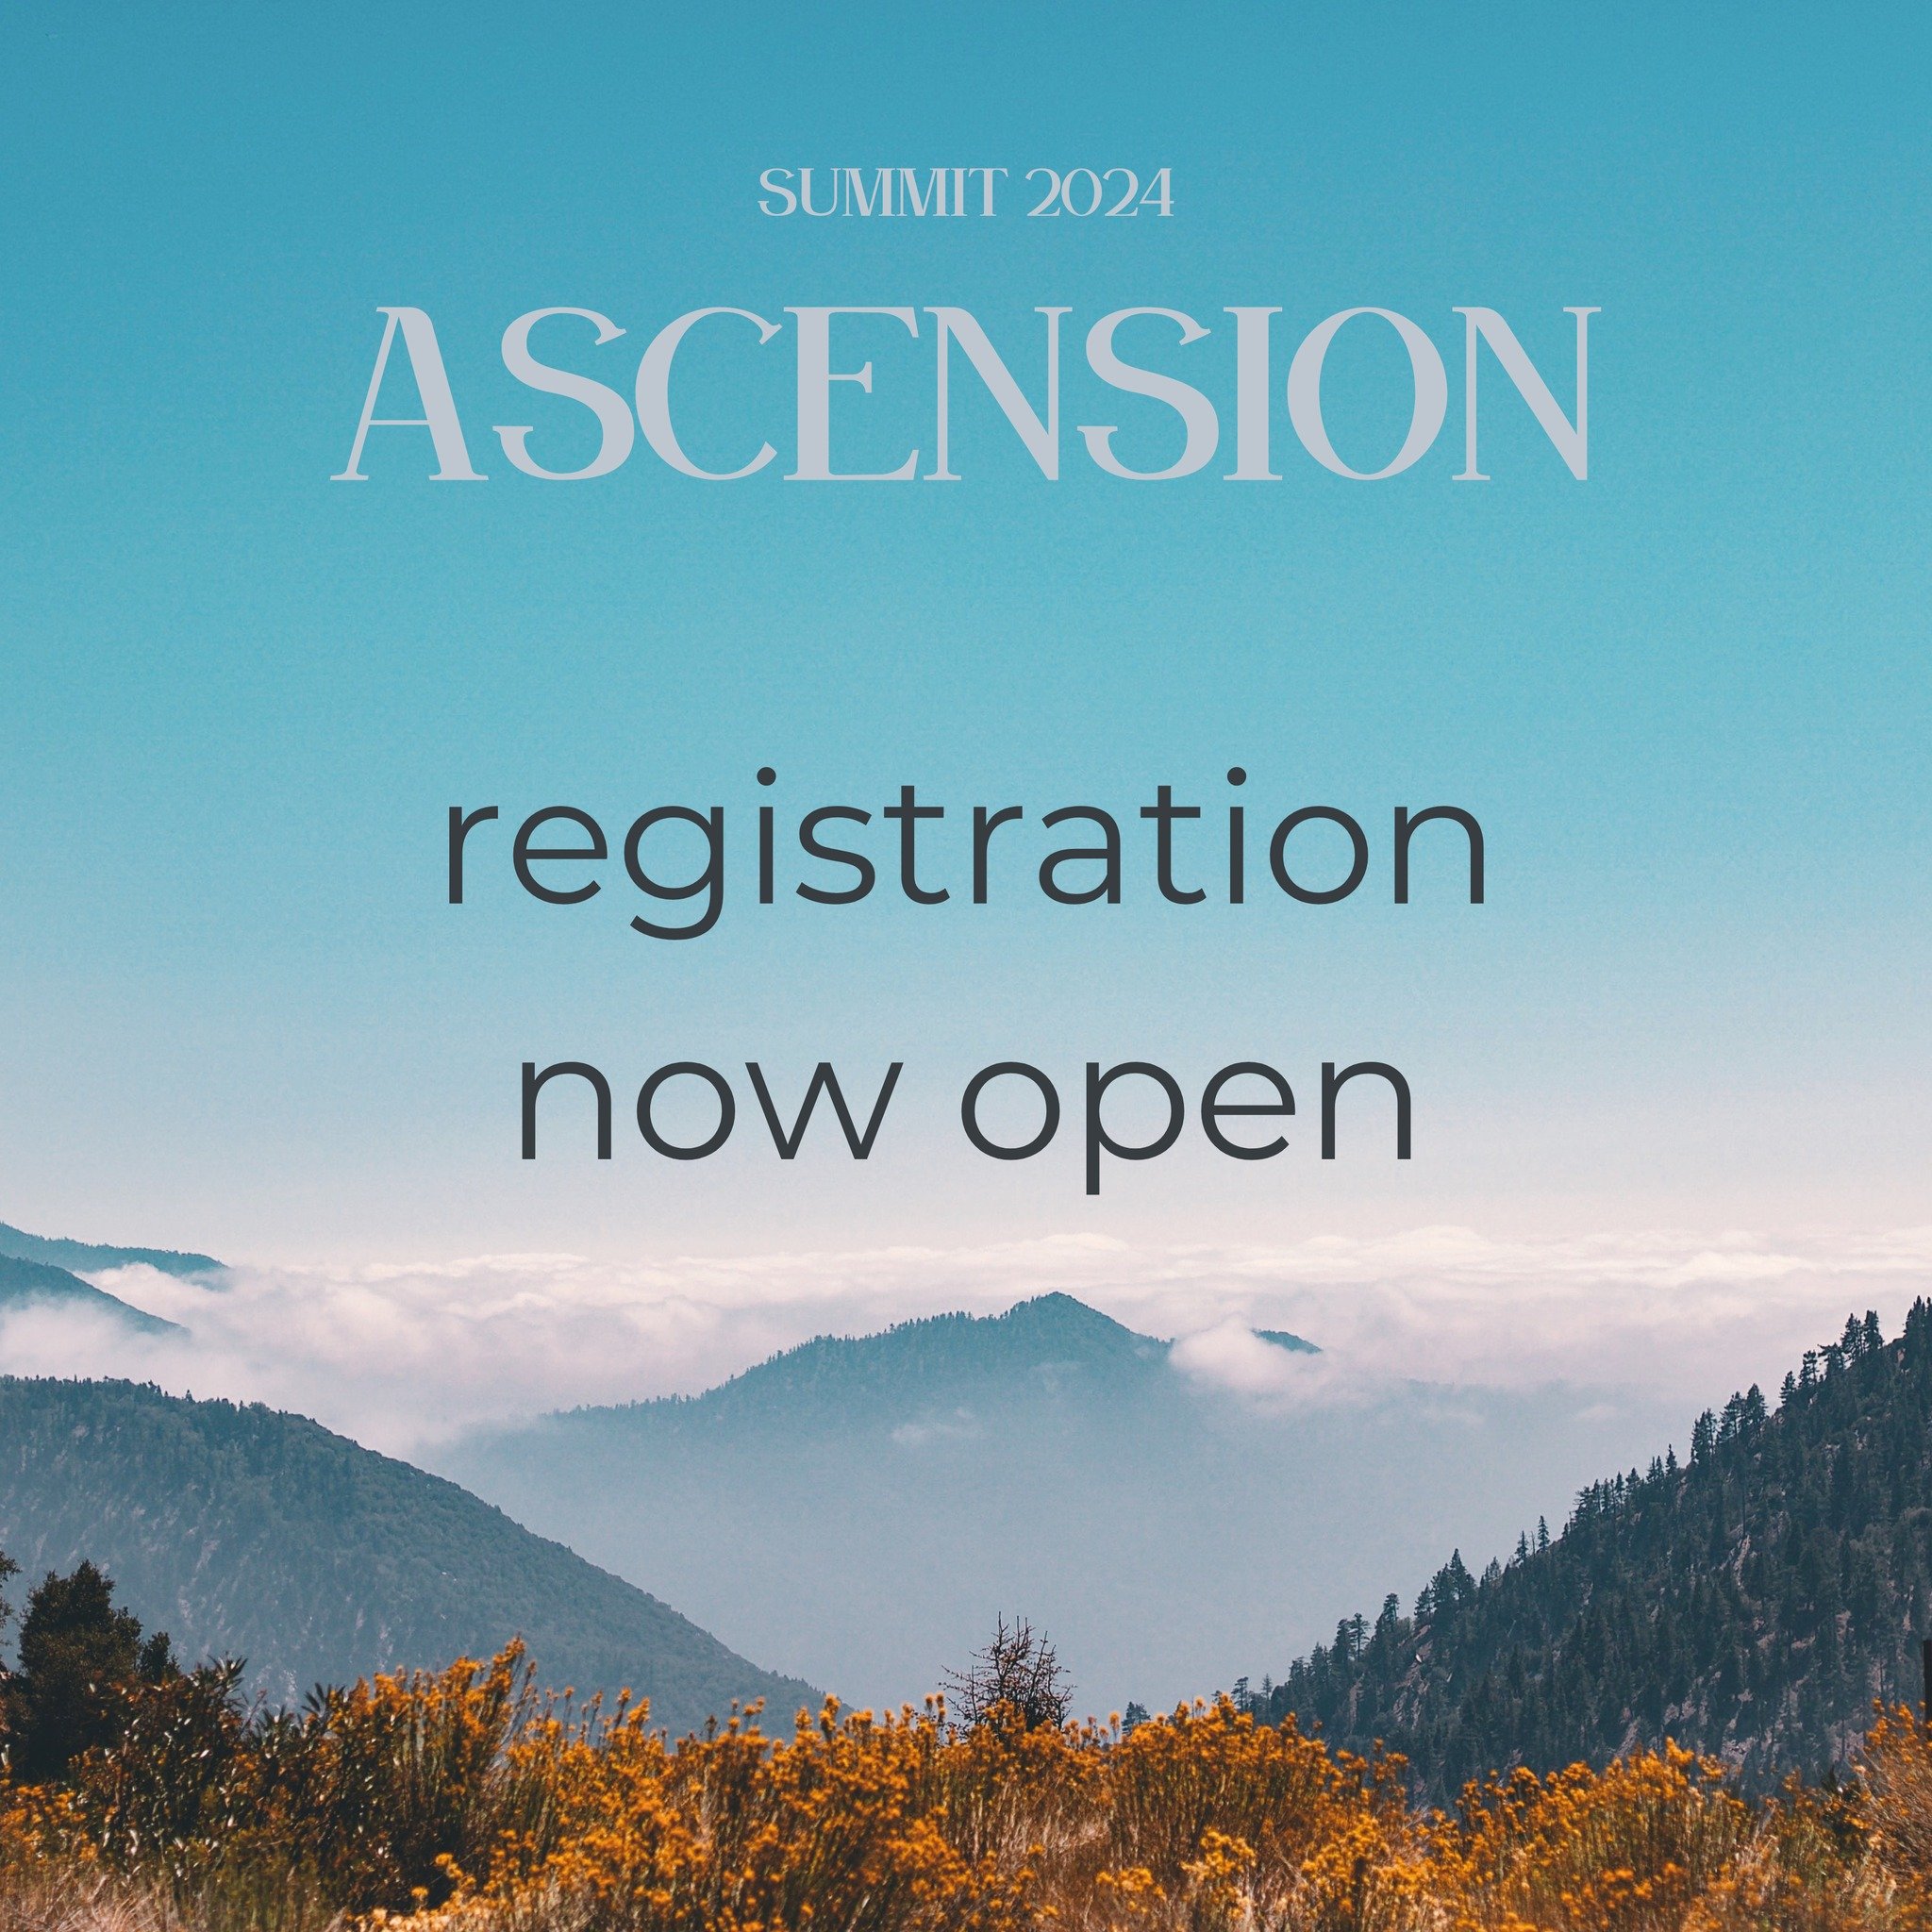 We are excited to announce that registrations for Summit 2024 are now open! This will be a time in conjunction with Deakin CU, to learn, worship and enjoy fellowship with one another. Find the link to register on our story or on the Facebook page.

2